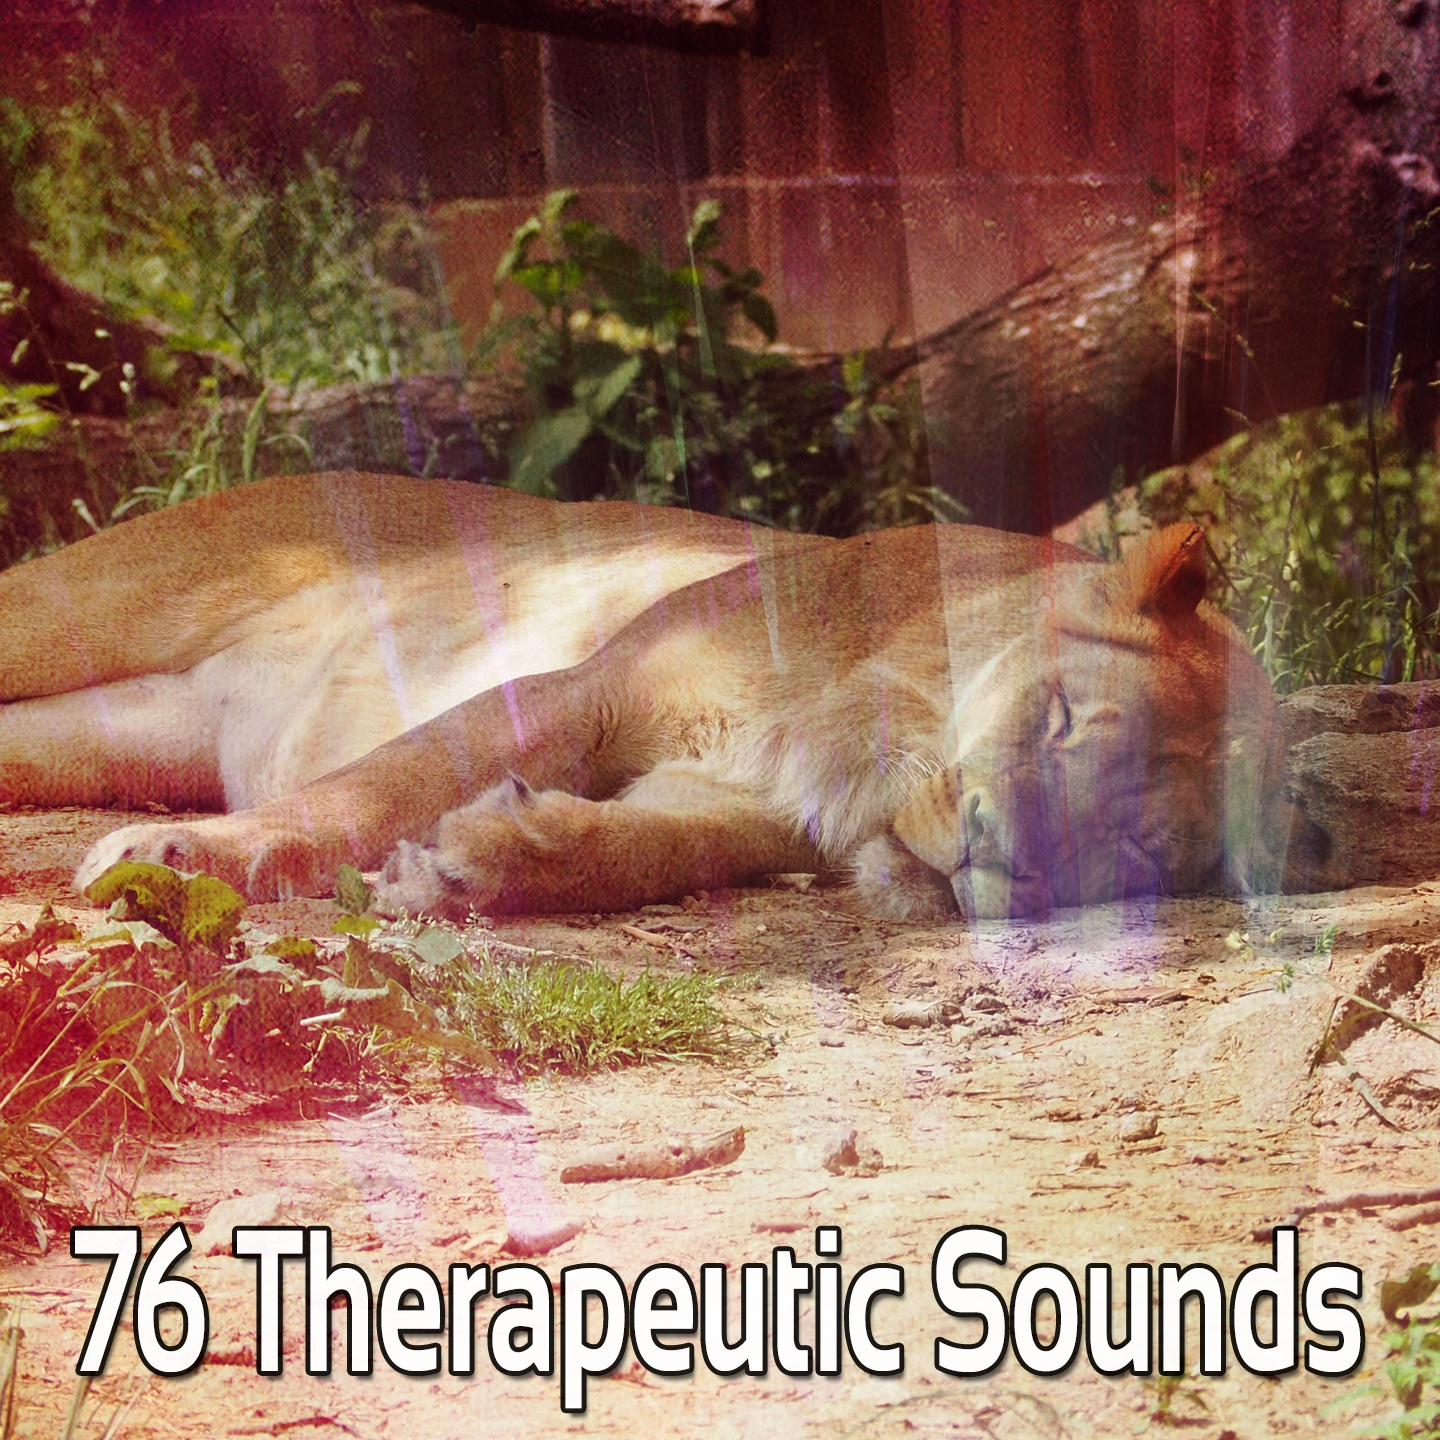 76 Therapeutic Sounds